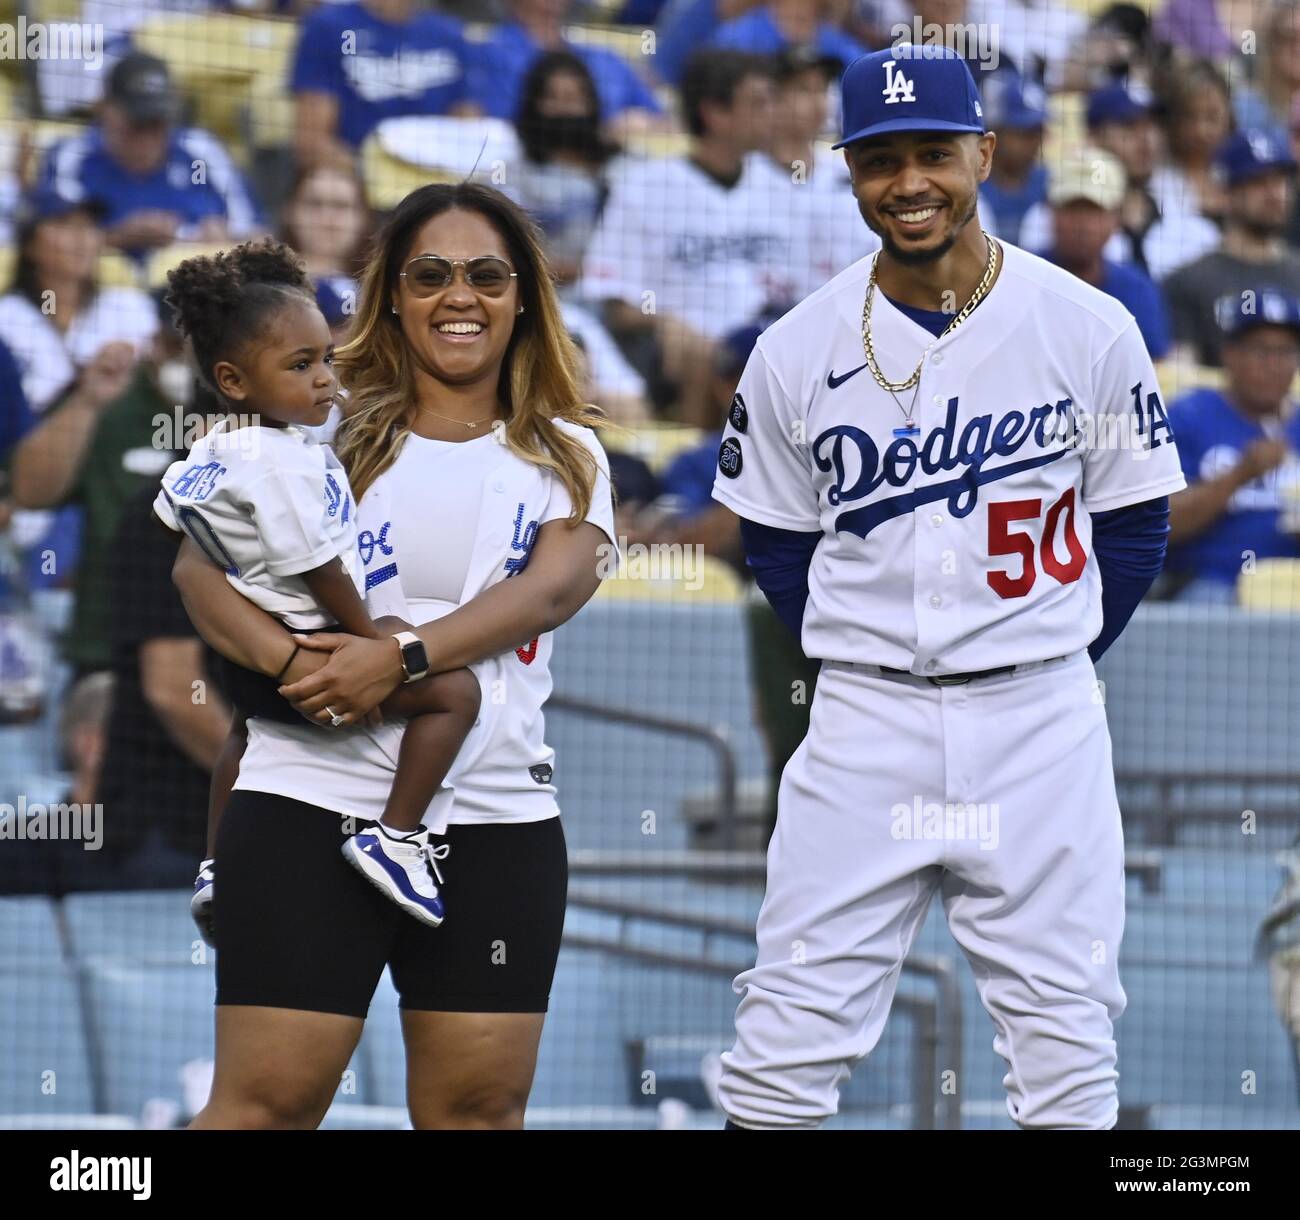 Los Angeles, United States. 17th June, 2021. Los Angeles Dodgers outfielder  Mookie Betts is joined by his fiance Brianna Hammonds and their daughter  Kynlee prior to the start of the Dodgers MLB